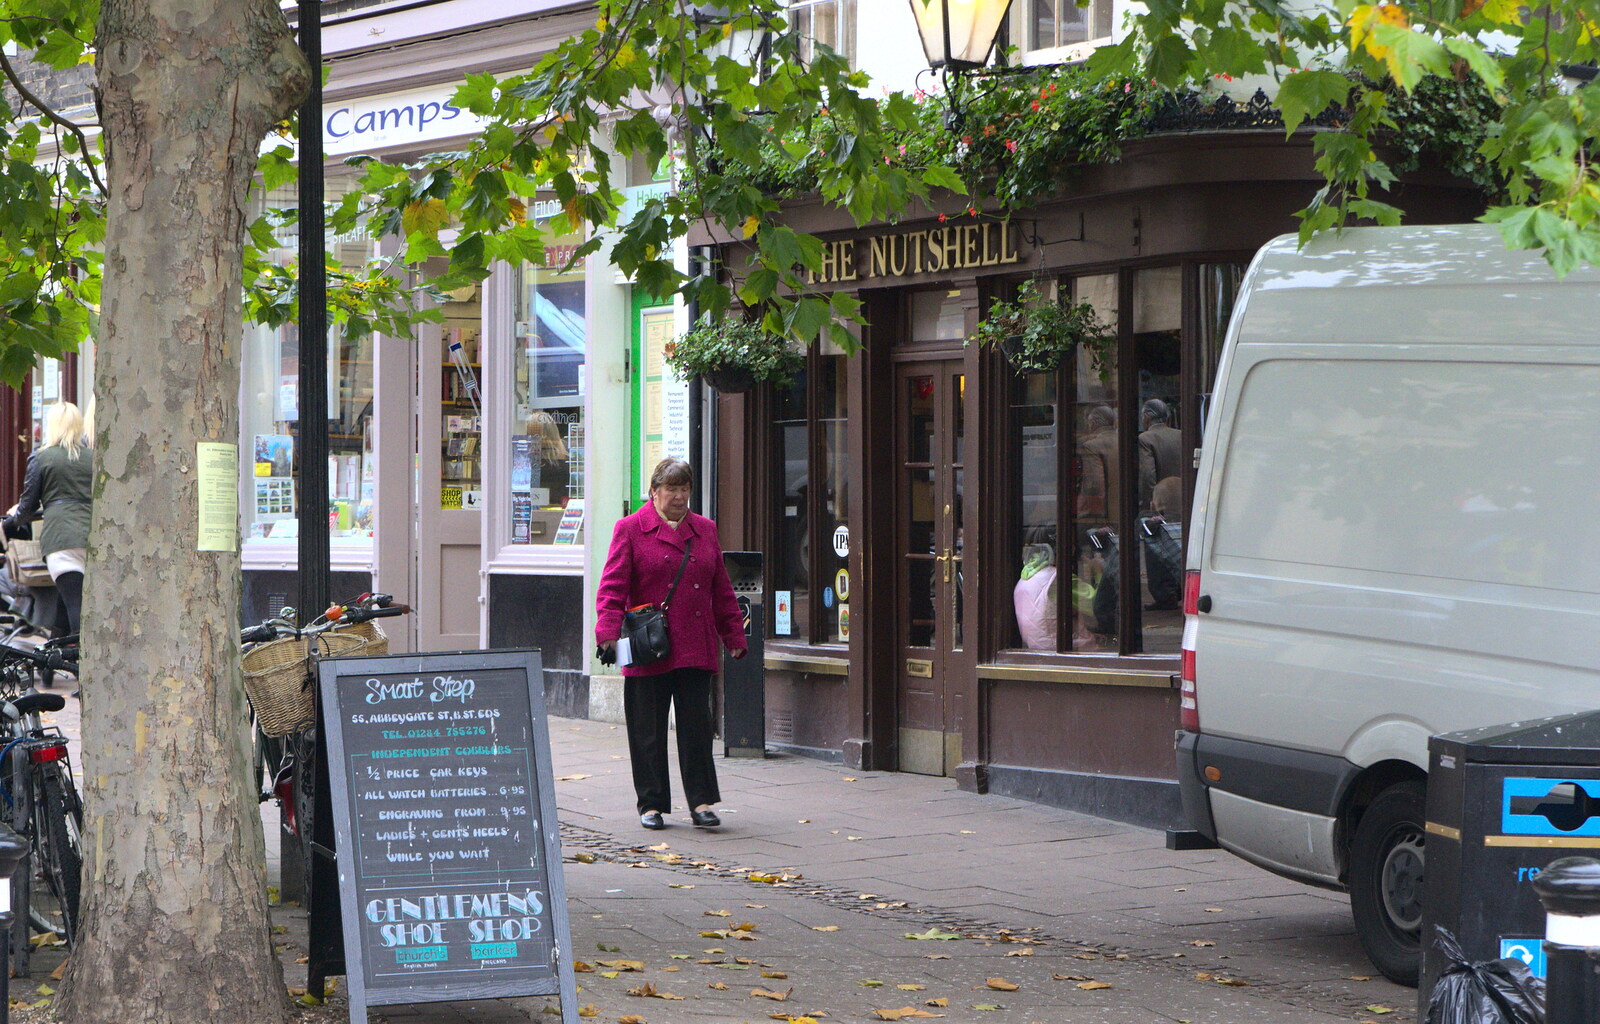 The Nutshell, one of the smallest pubs in England from A Trip to Abbey Gardens, Bury St. Edmunds, Suffolk - 29th October 2014